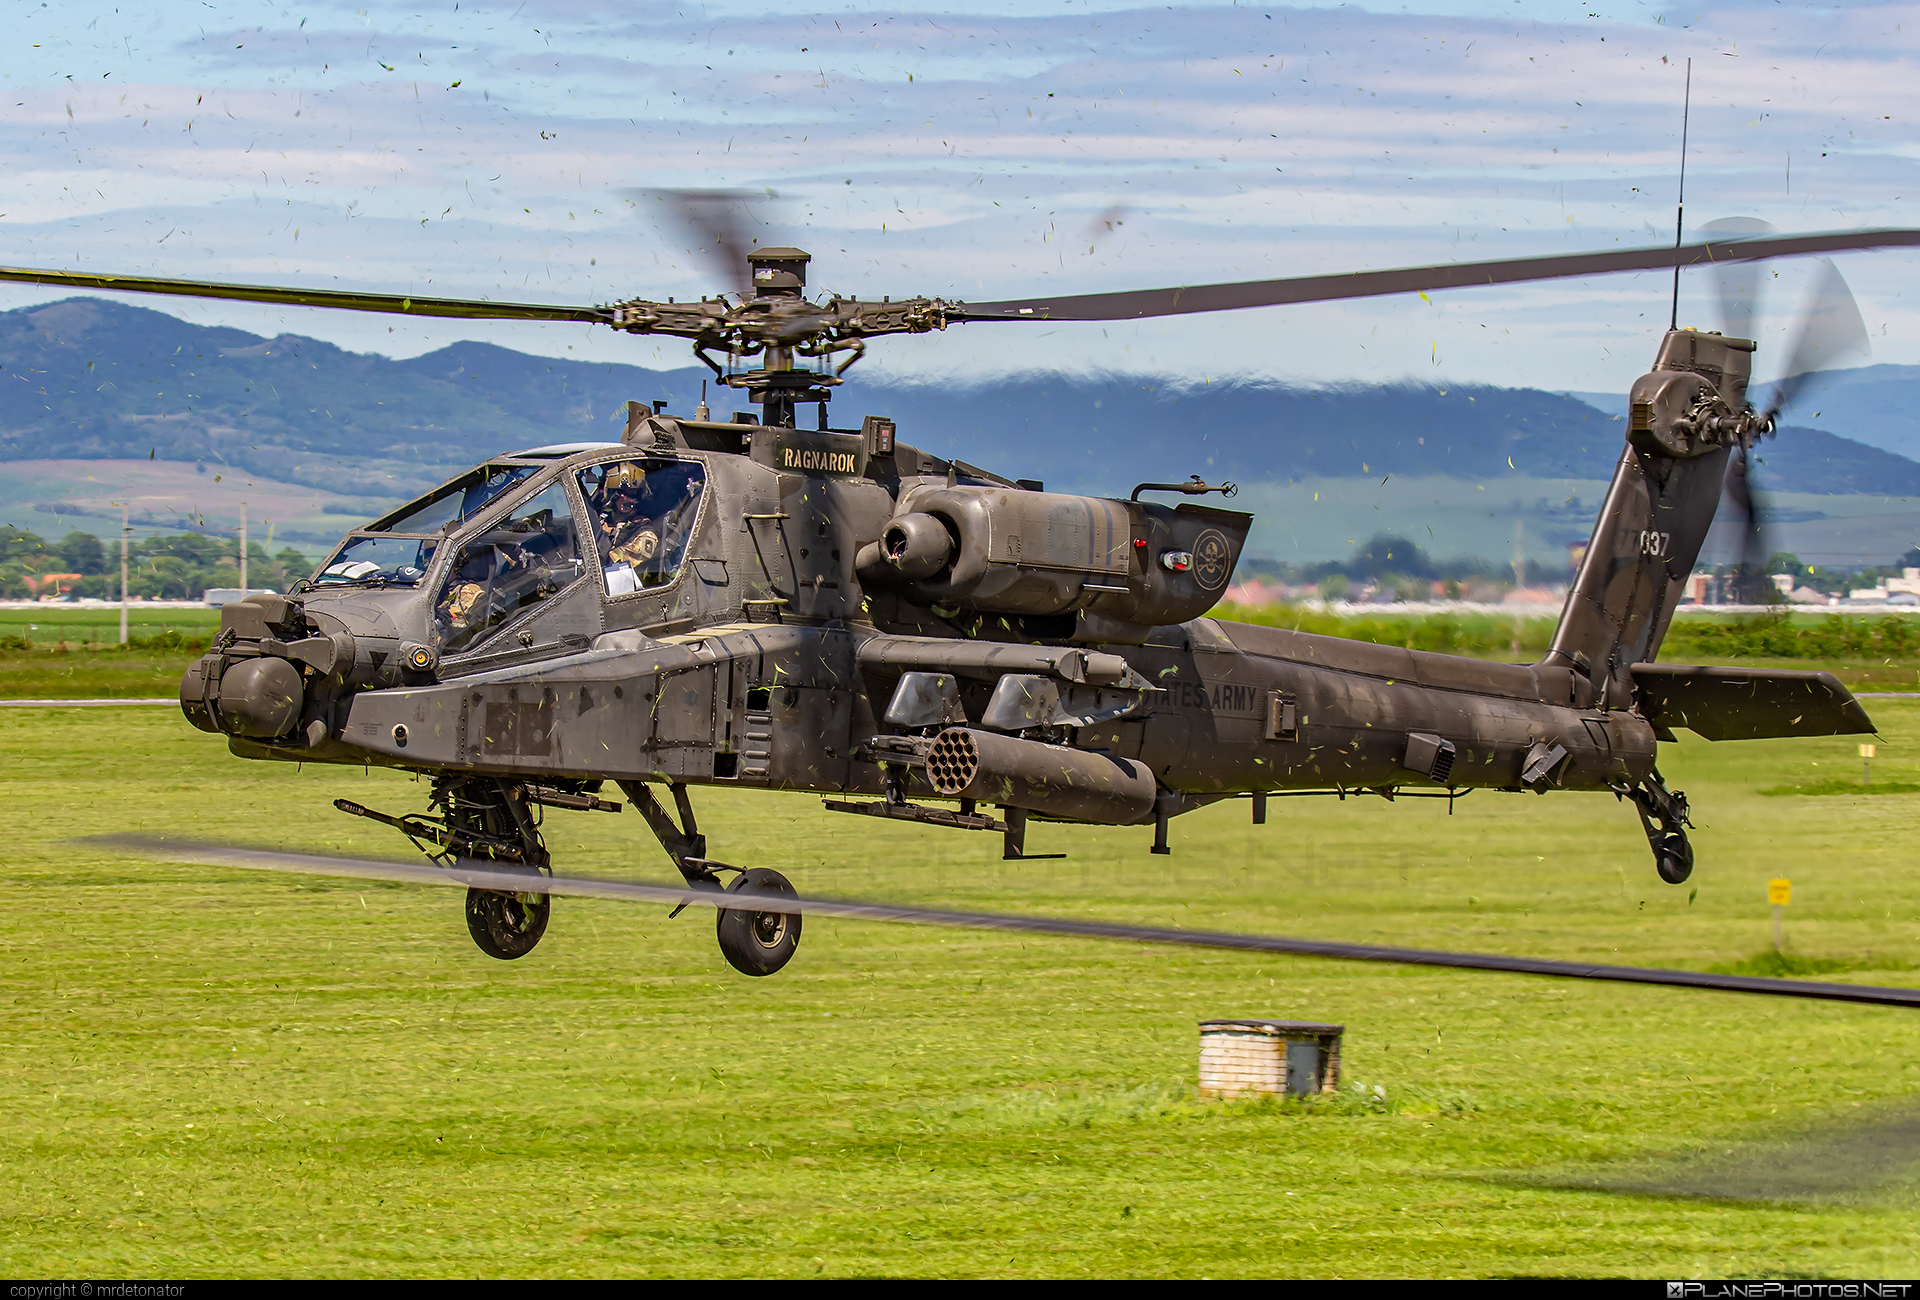 Boeing AH-64D Apache Longbow - 07-07037 operated by US Army #boeing #usarmy